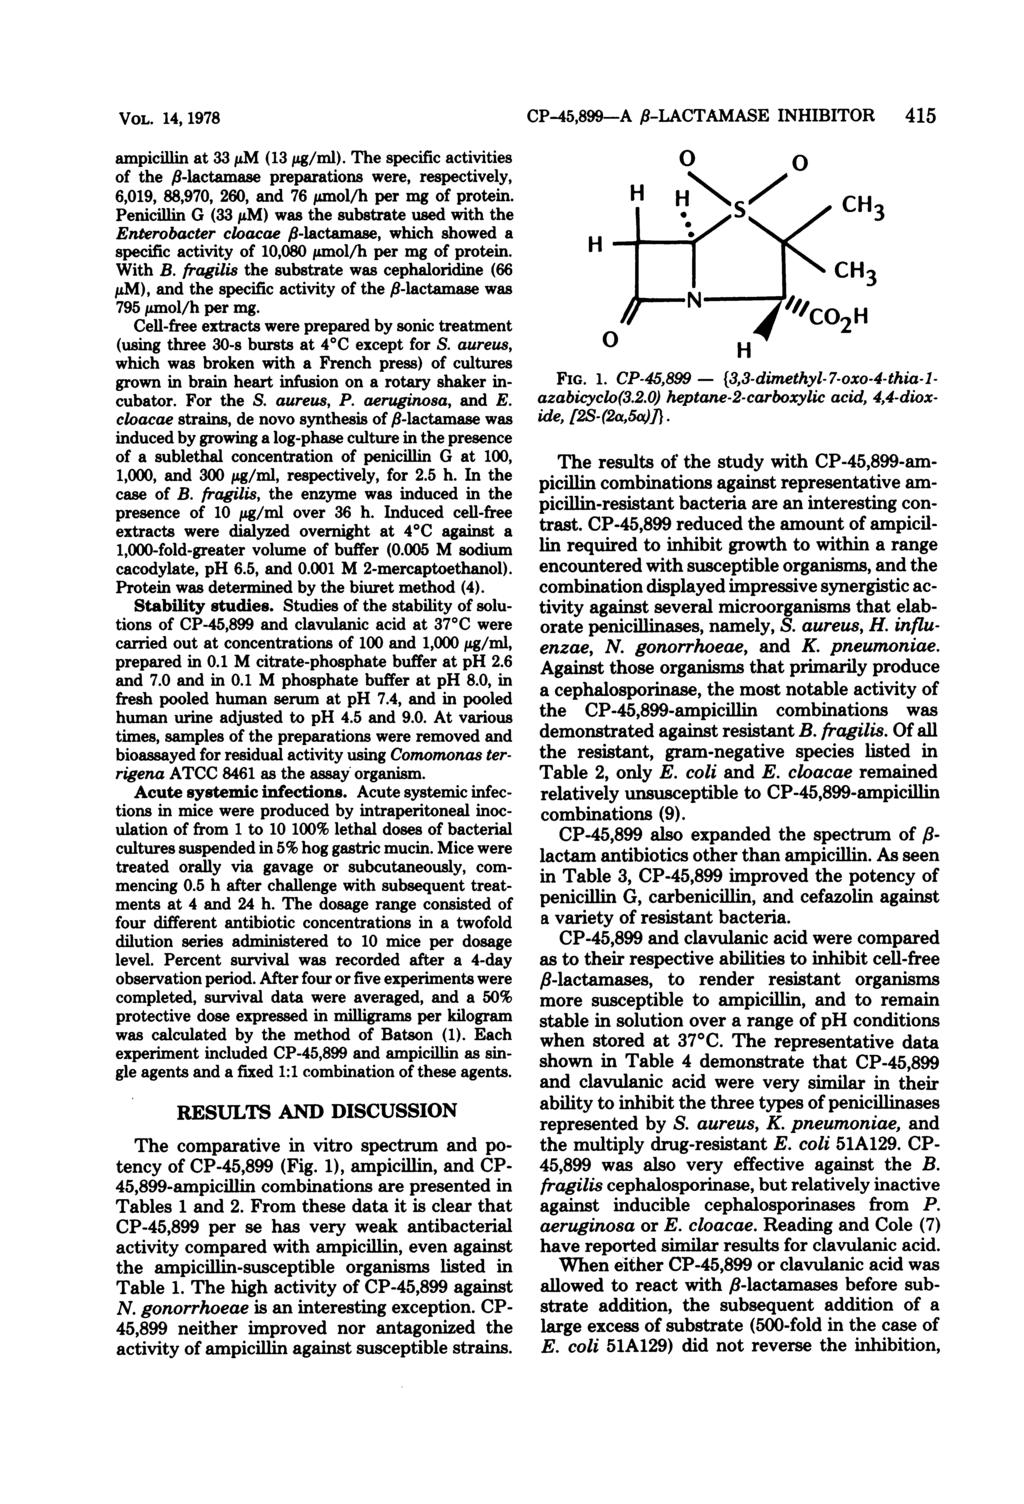 VOL. 14, 1978 ampicillin at 33 i.m (13,ug/ml). The specific activities of the f.-lactamase preparations were, respectively, 6,019, 88,970, 260, and 76,umol/h per mg of protein.